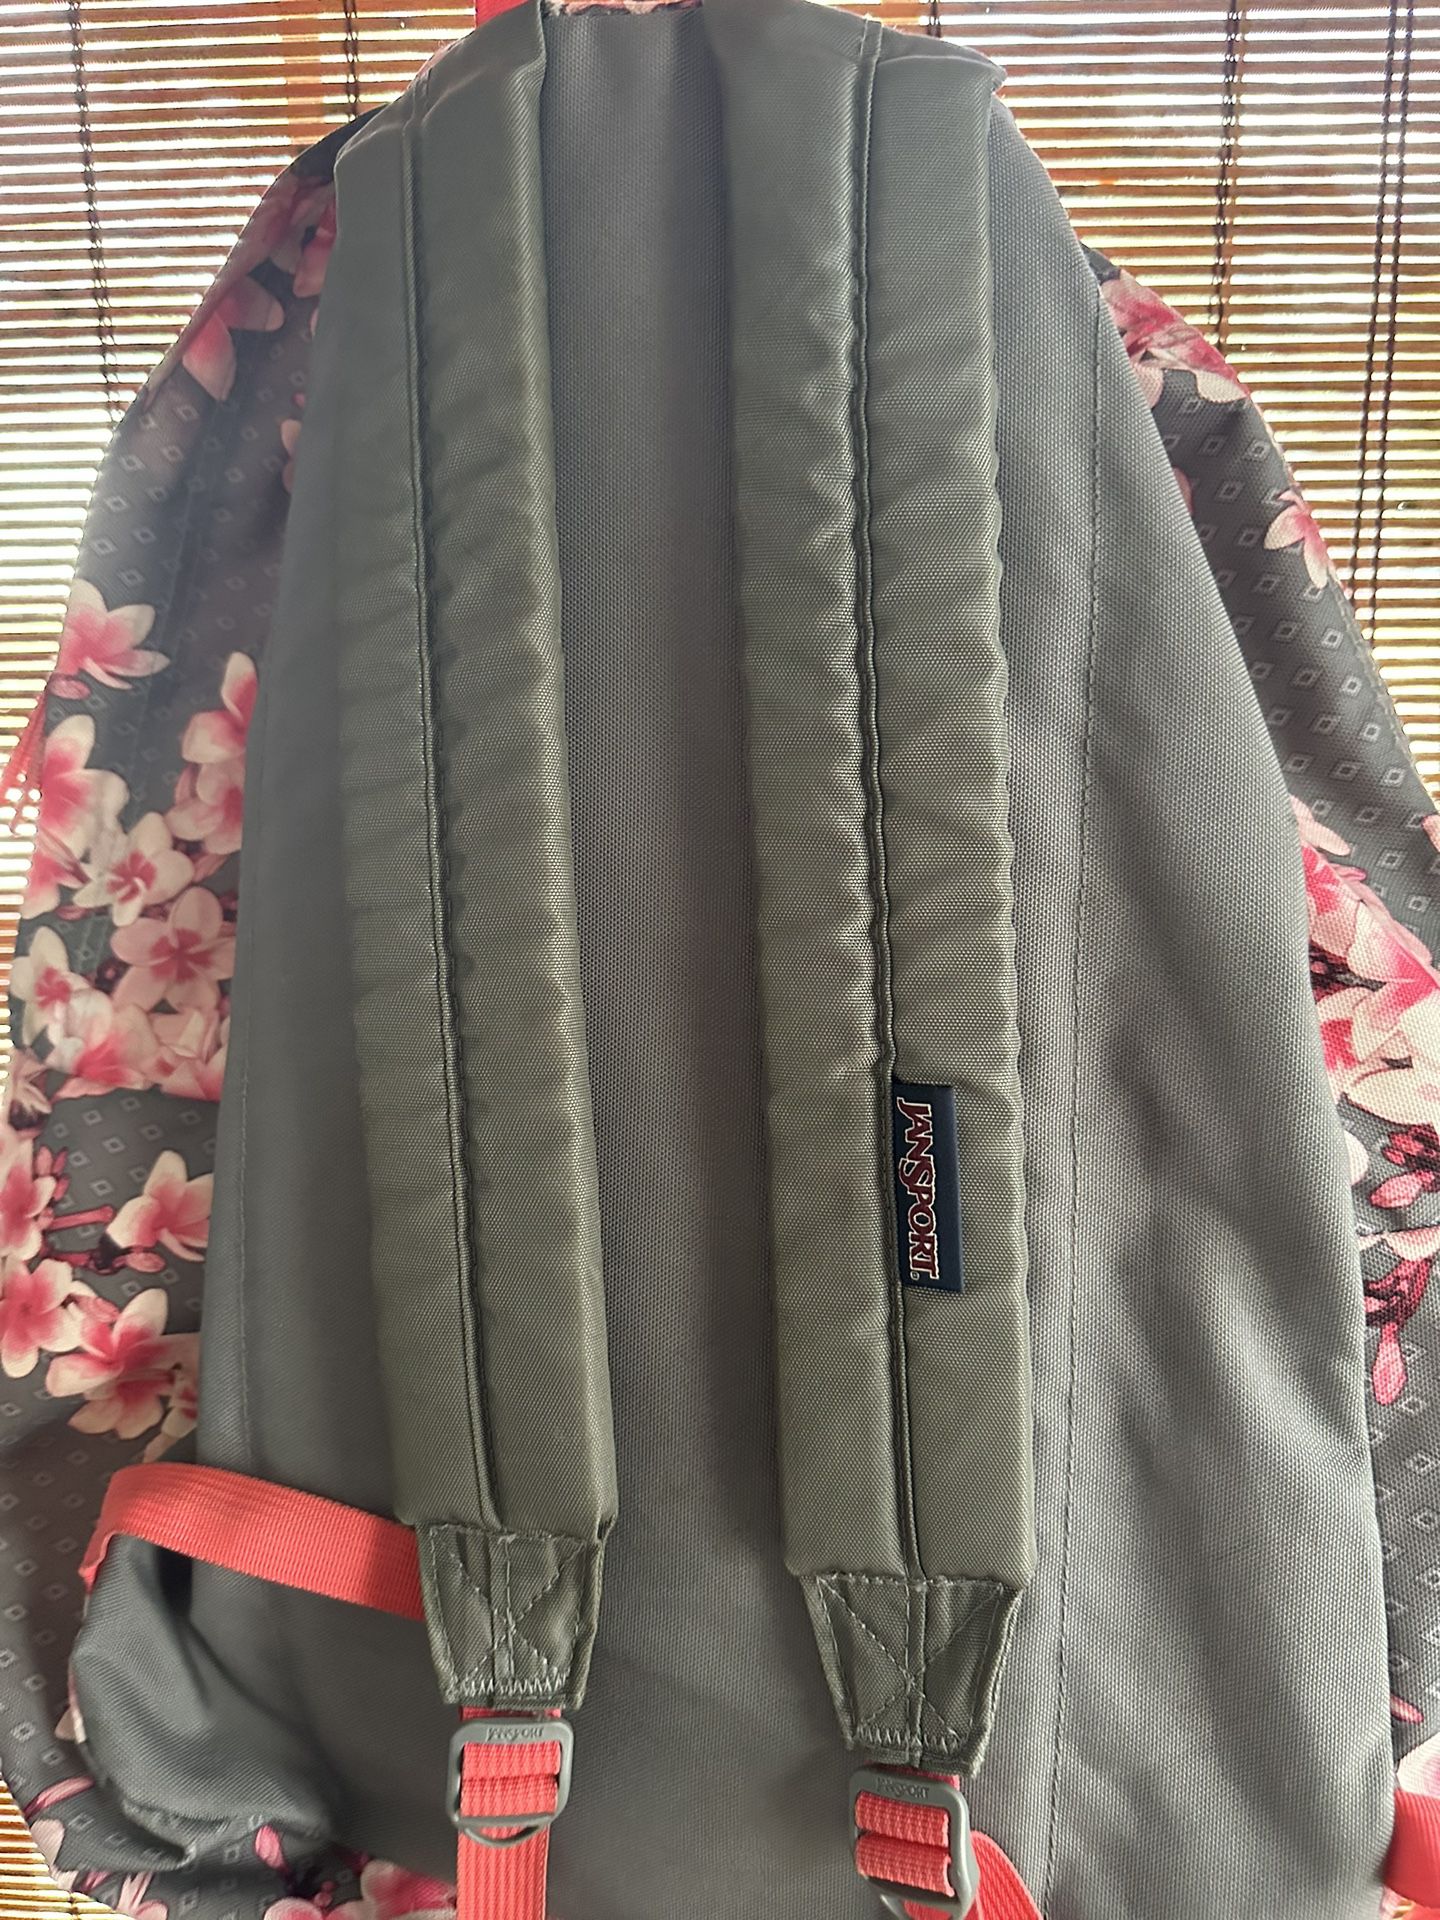 JANSPORT BACKPACK CHERRY BLOSSOMS for Sale in San Antonio, TX - OfferUp